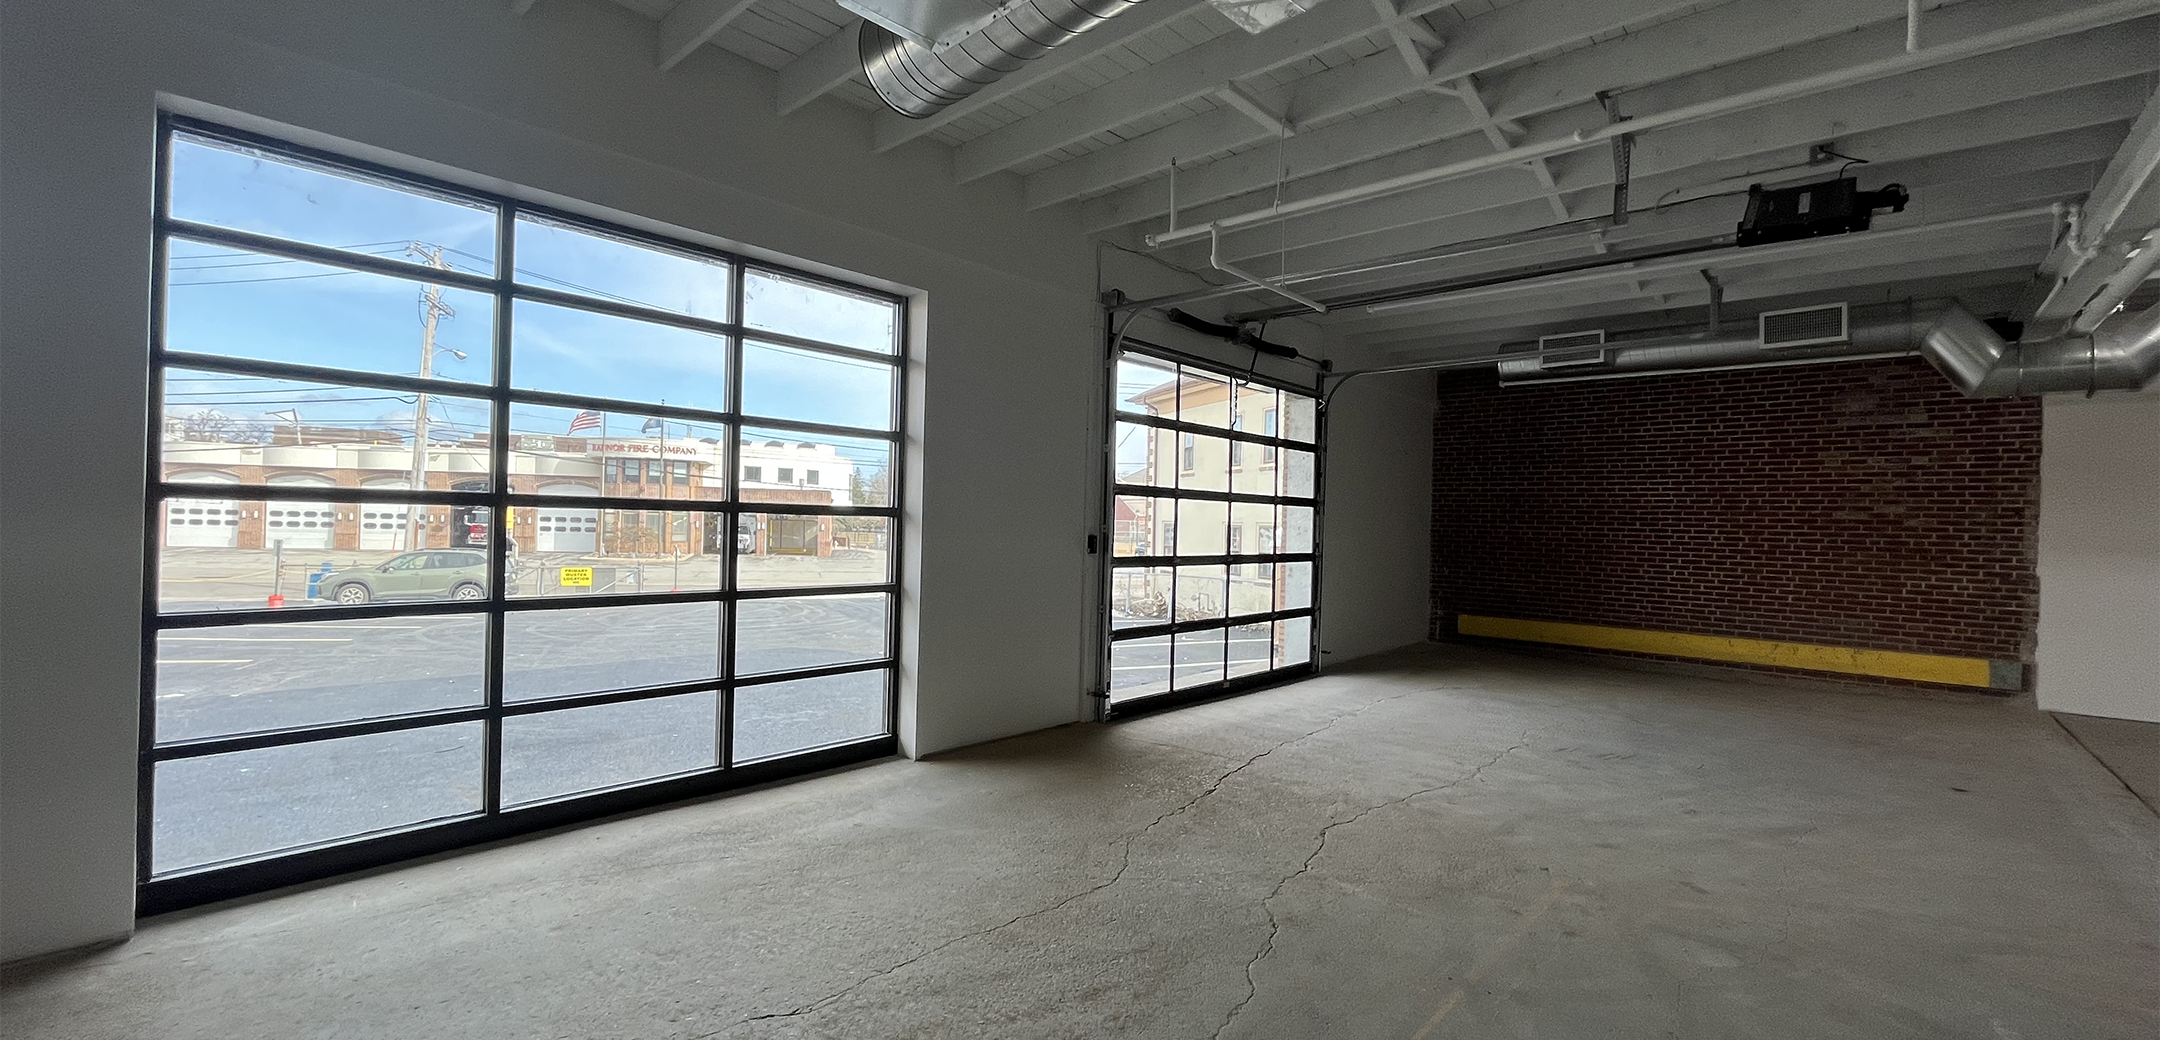 An angled interior view of the 108 Wayne Ave glass garage shutter doors looking outside, industrial vents on the ceiling and back brick wall.